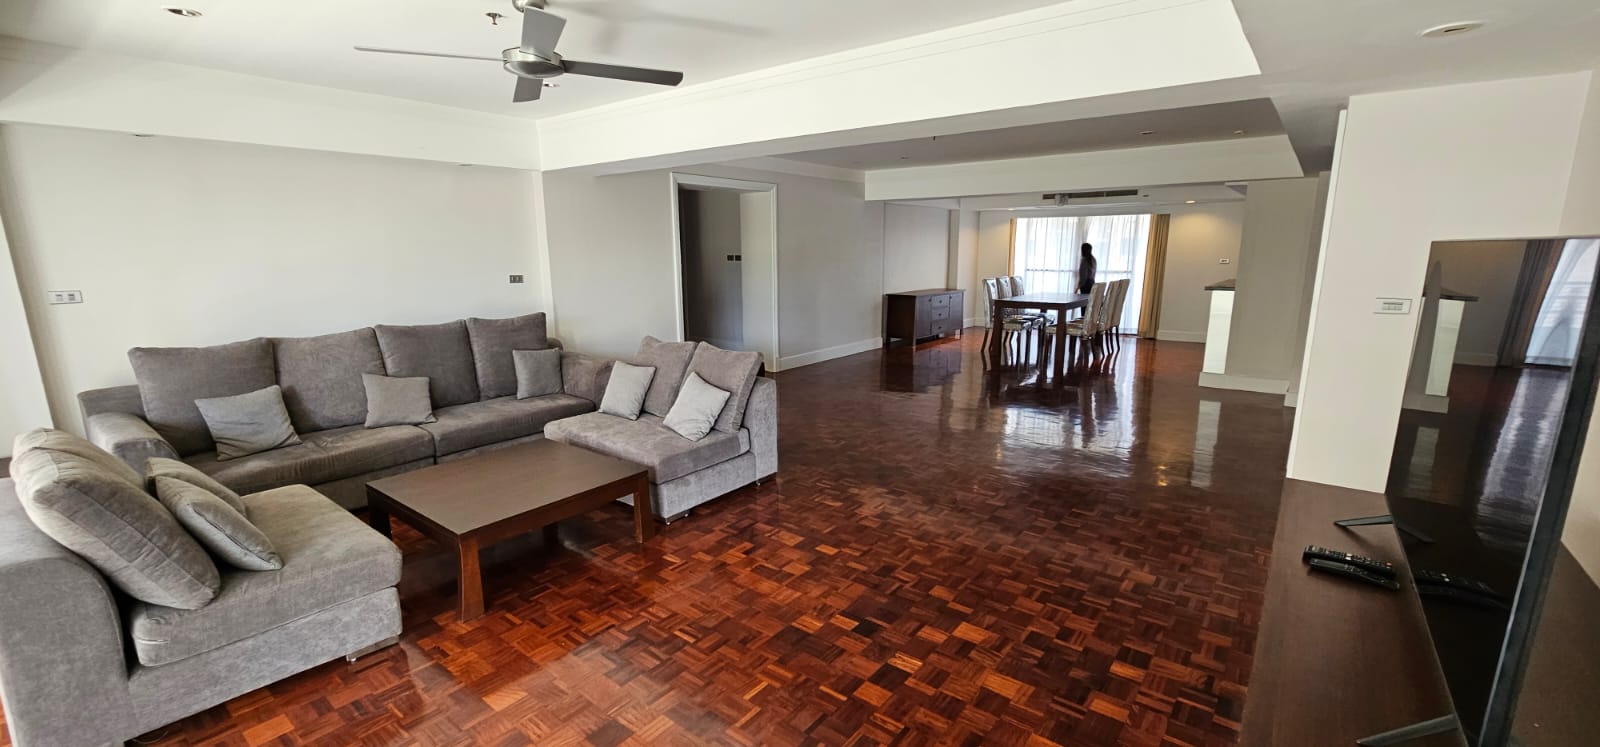 4 Bedrooms, 4 Bathrooms 300sqm size at Phirom Garden Residence For Rent 160, 000 THB/ Month